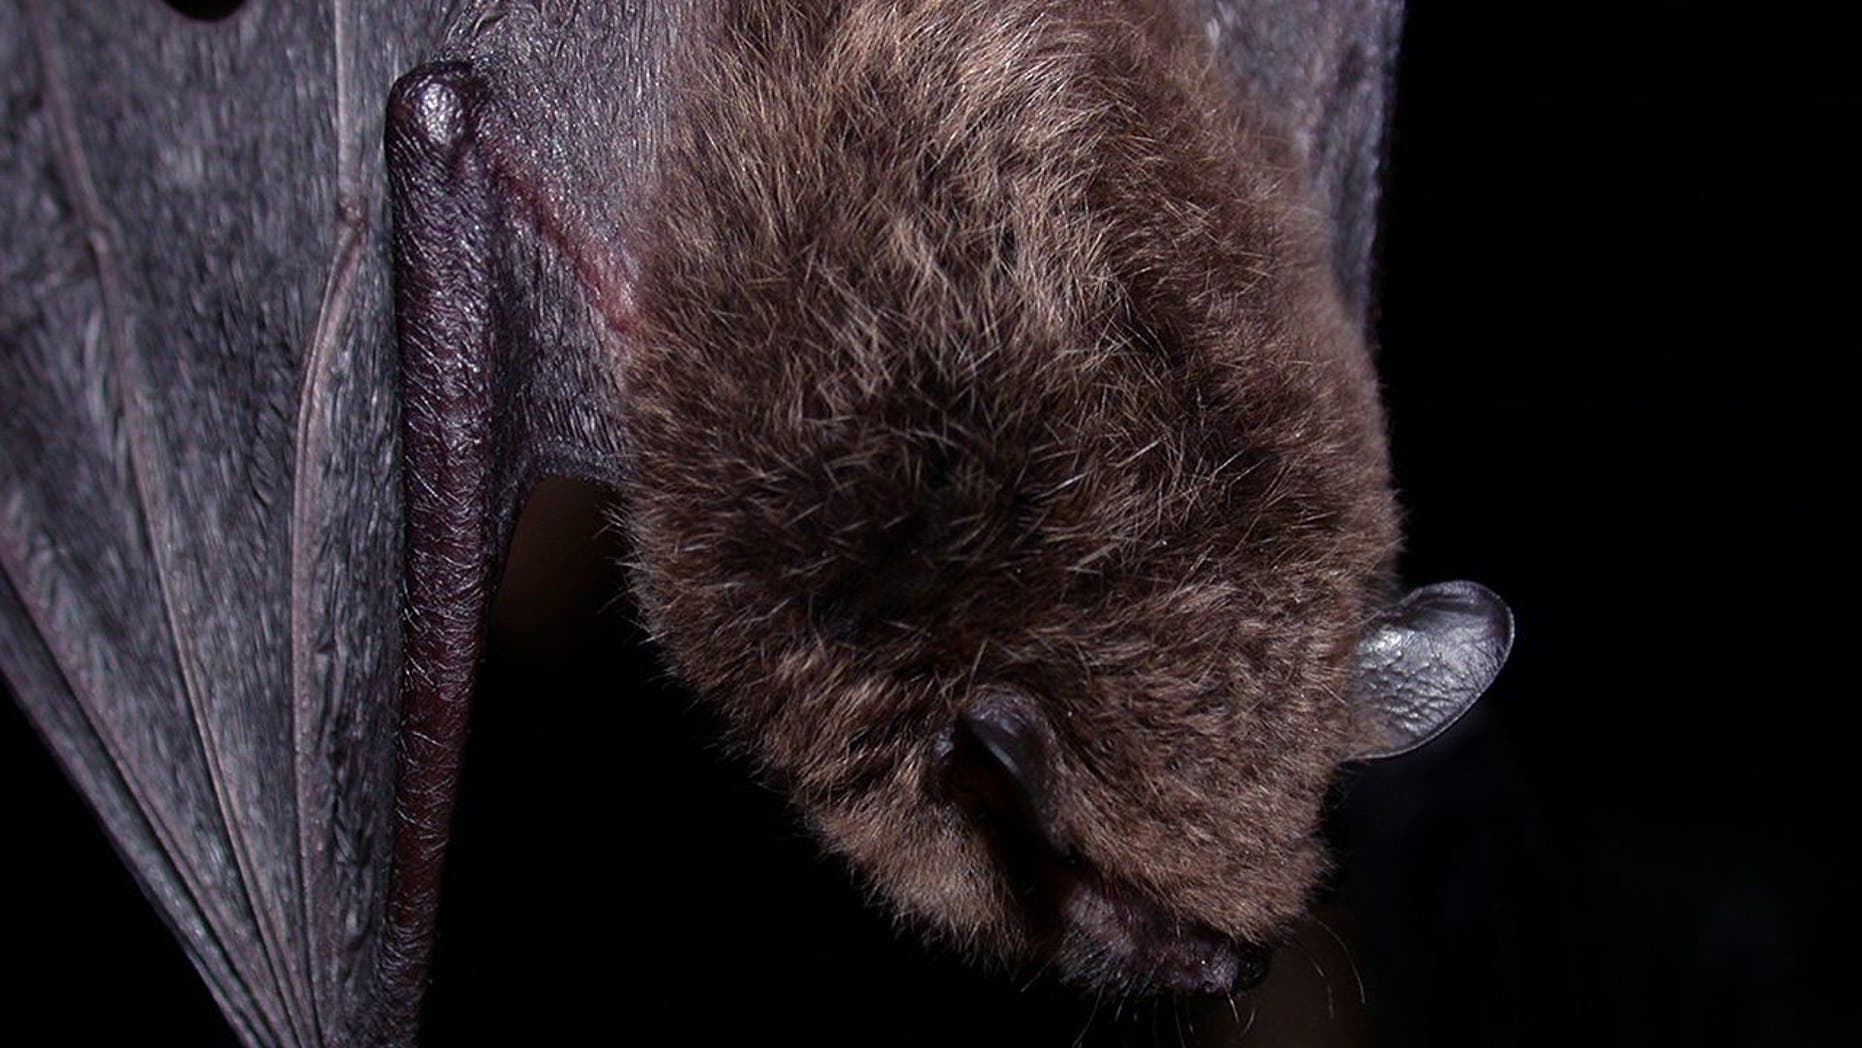 Ebola virus found in bat in West Africa for the first time, scientists say